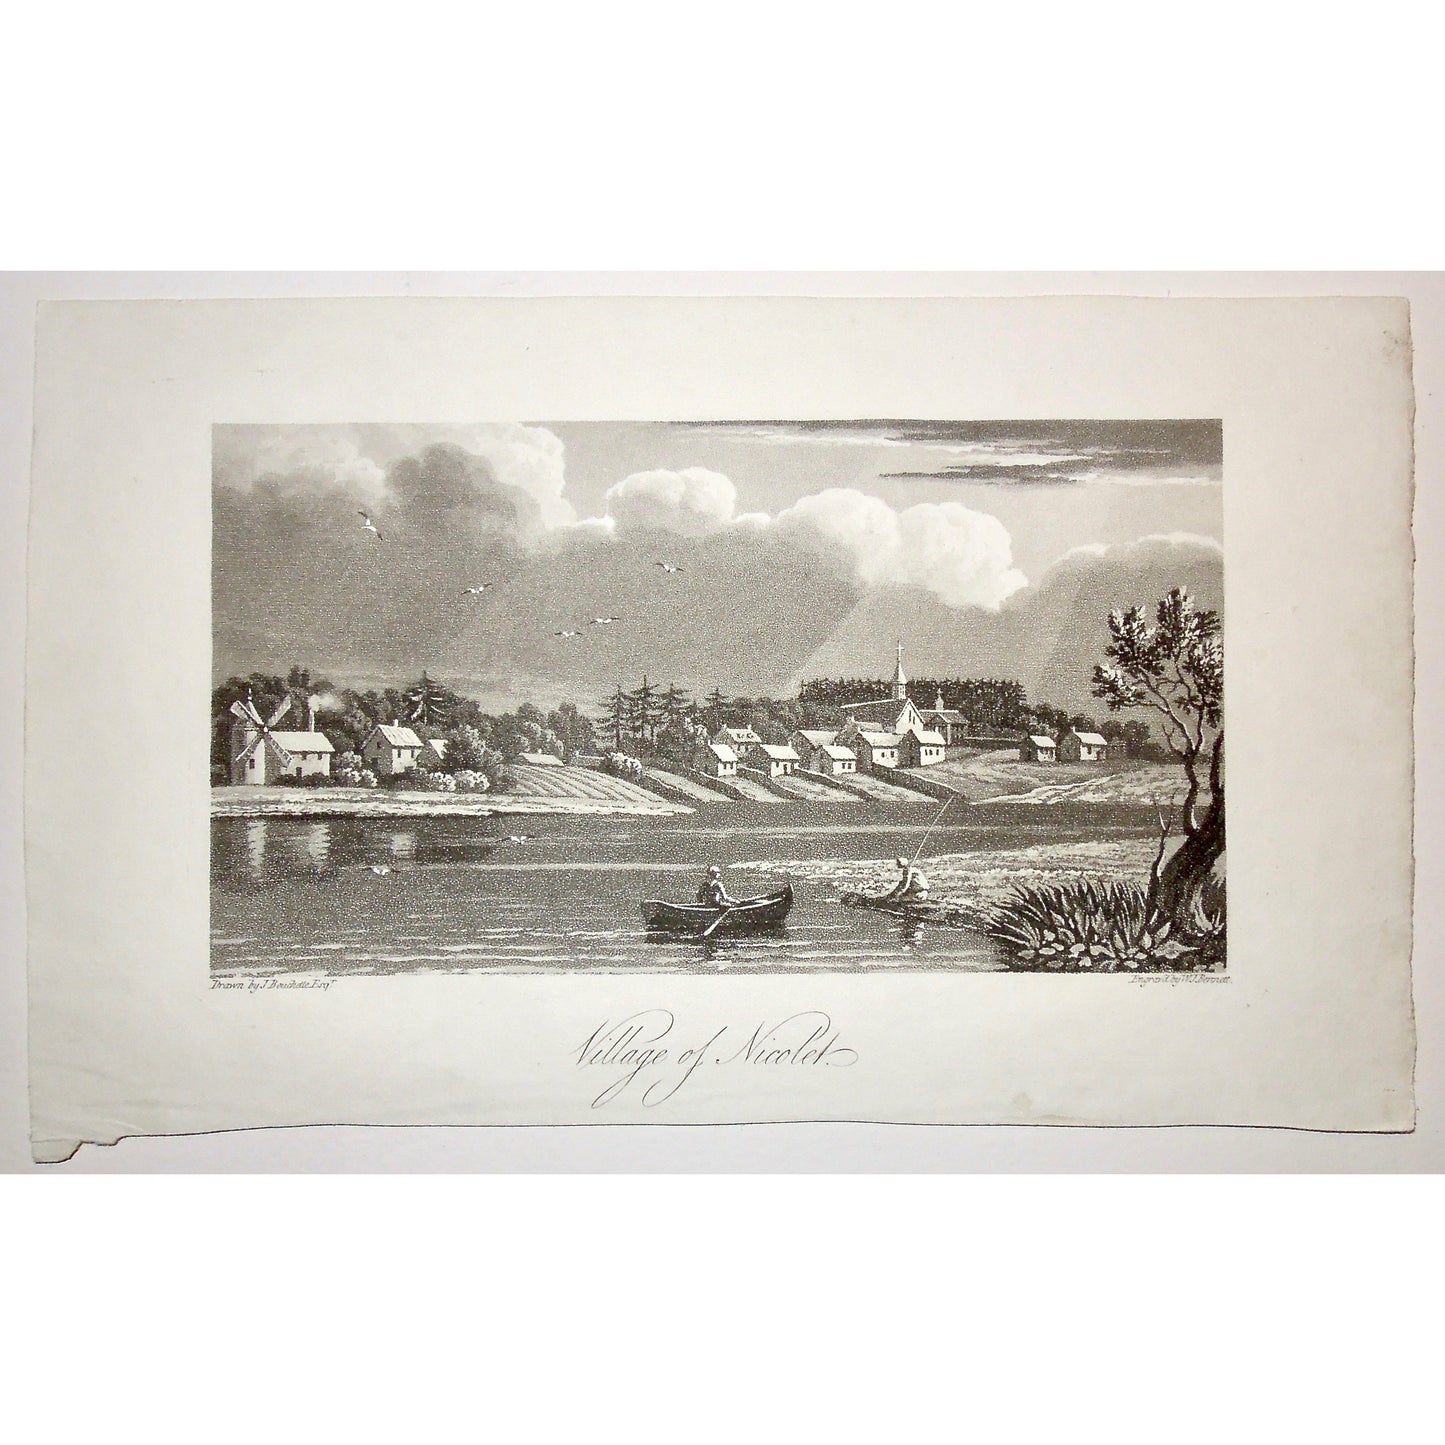 Village, town, Village of Nicolet, Nicolet, windmill, boat, row boat, fishing, church, canadian town, A Topographical Description of the Province of Lower Canada, Lower Canada, Joseph Bouchette, Bouchette, 1815, W. Faden, Faden, W. J. Bennett, Bennett, Charing Cross, London, steel engraving, black and white, Antique Print, Vintage, Prints, Wall decor, Home decor, Design, Engraving, Original, Collector, Art, Interior Design, Canadiana, History, Historical Print,